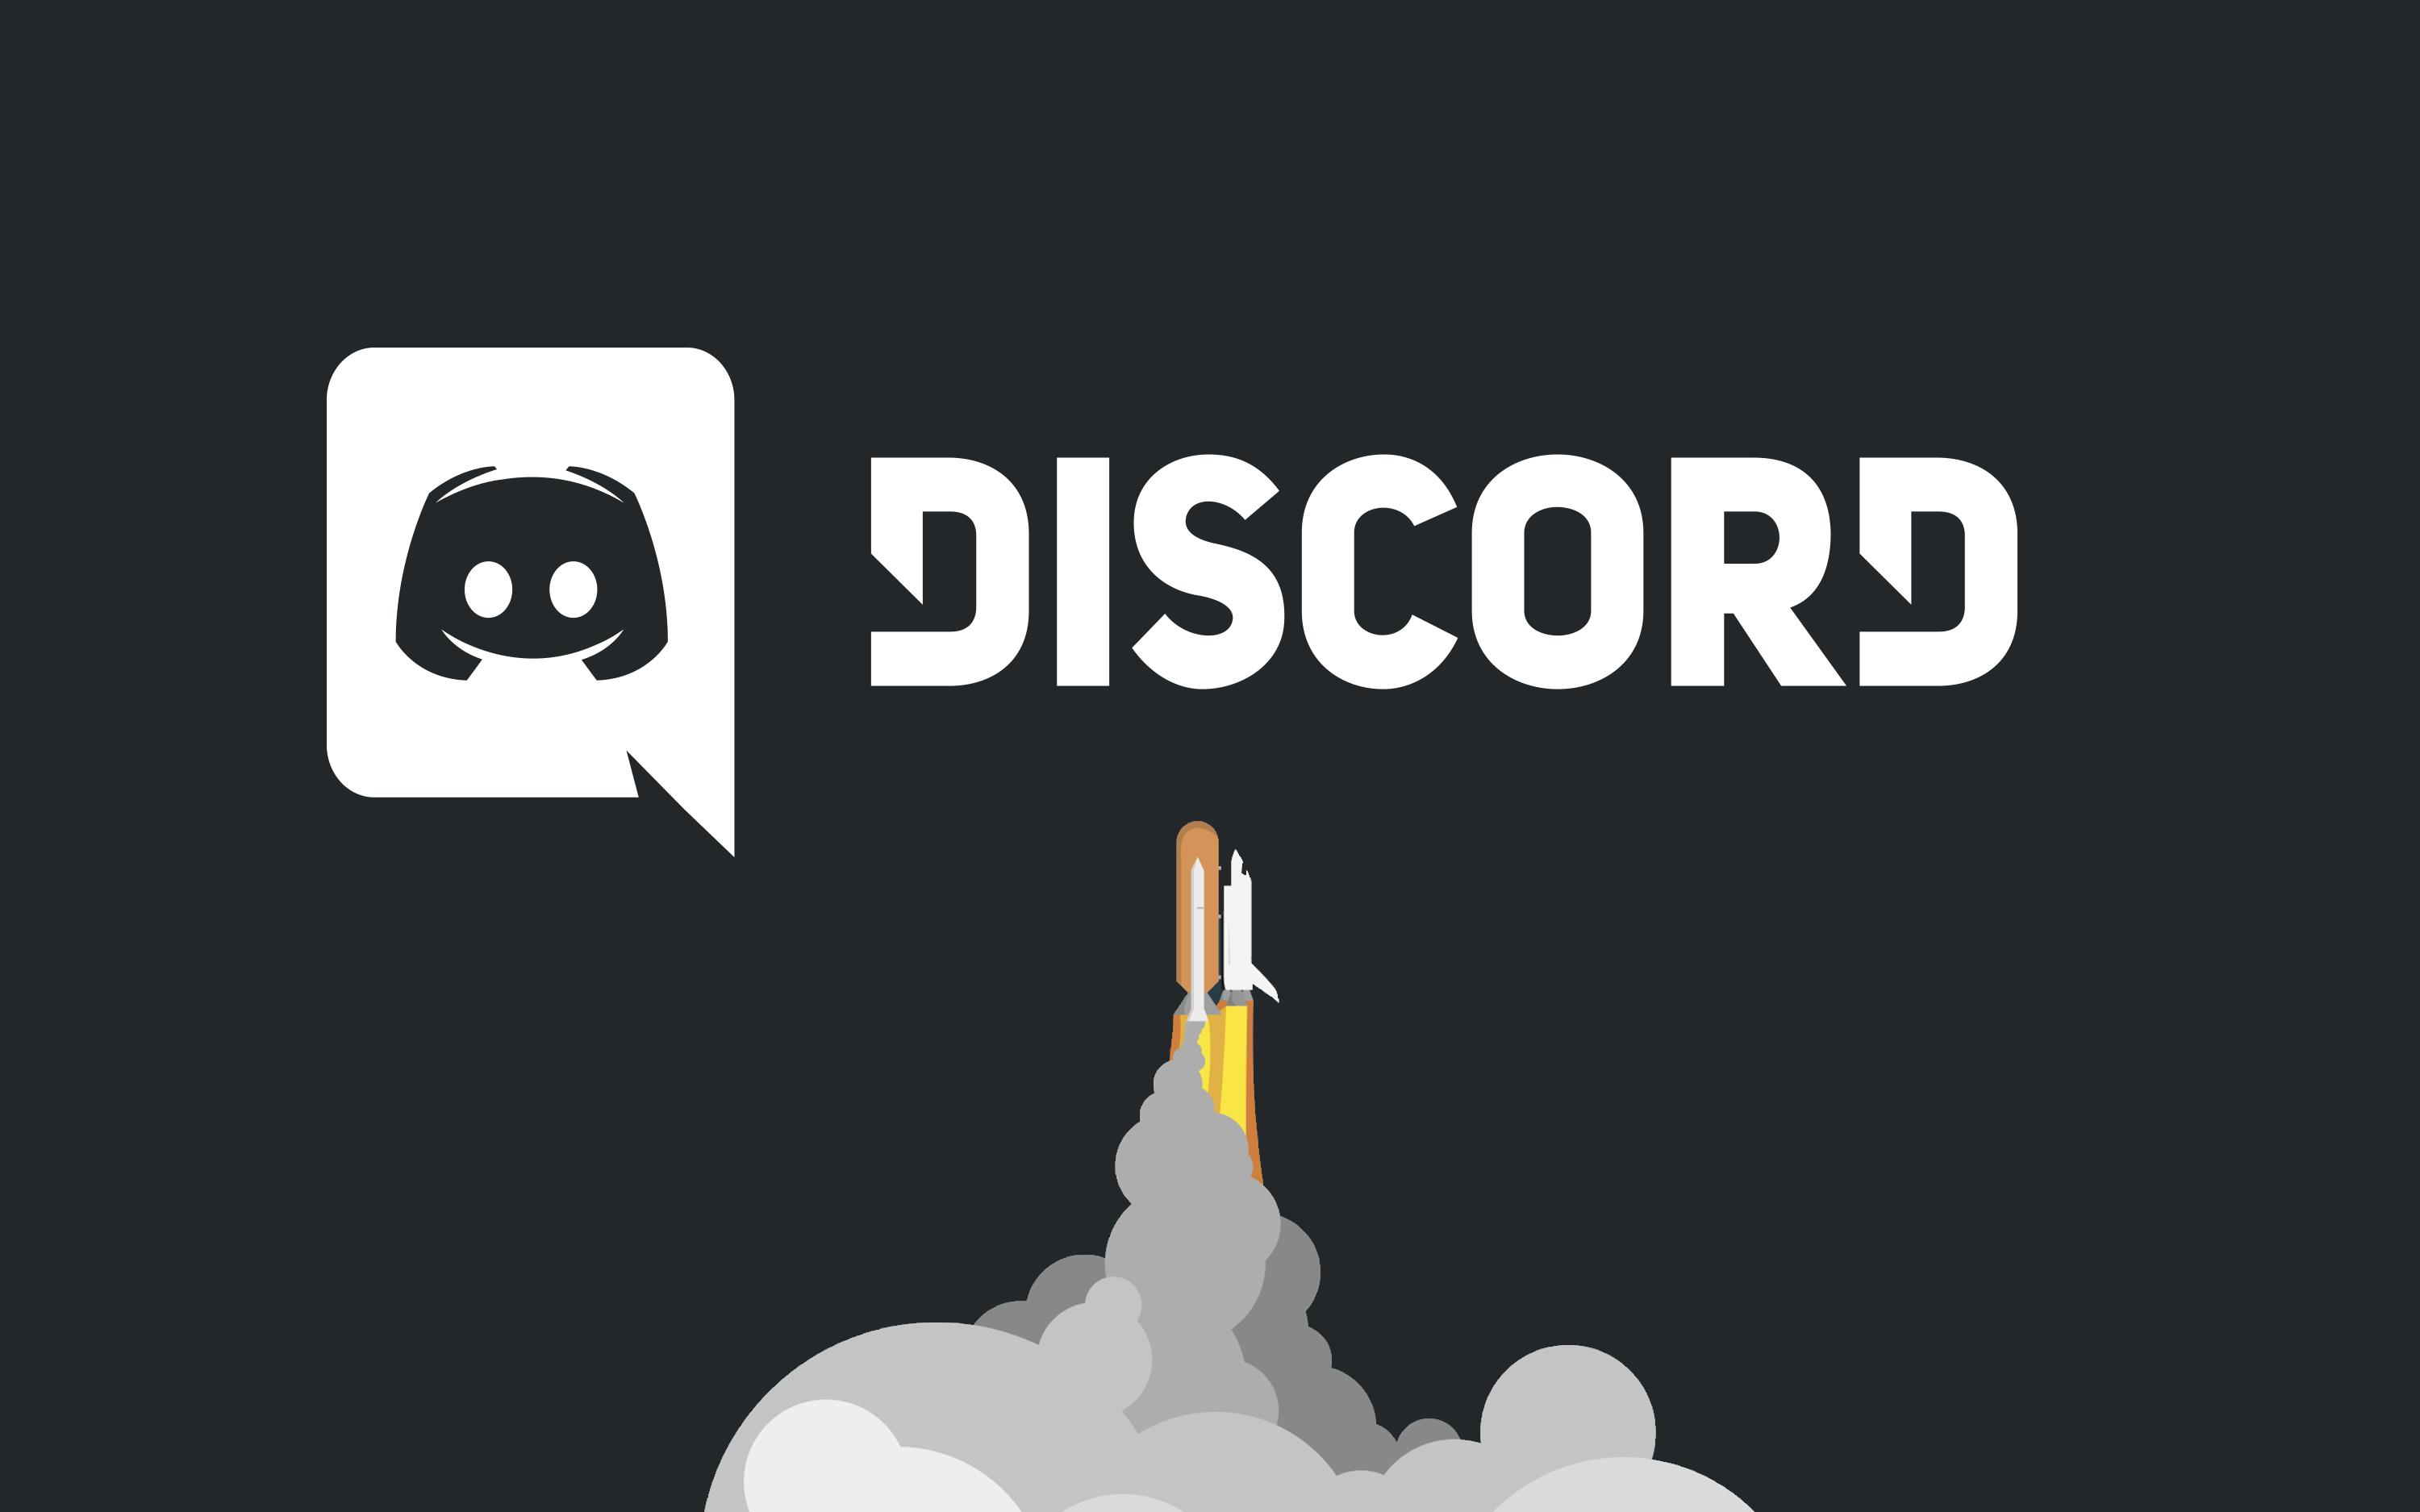 Microsoft has been discussing with Discord for the acquisition of the app